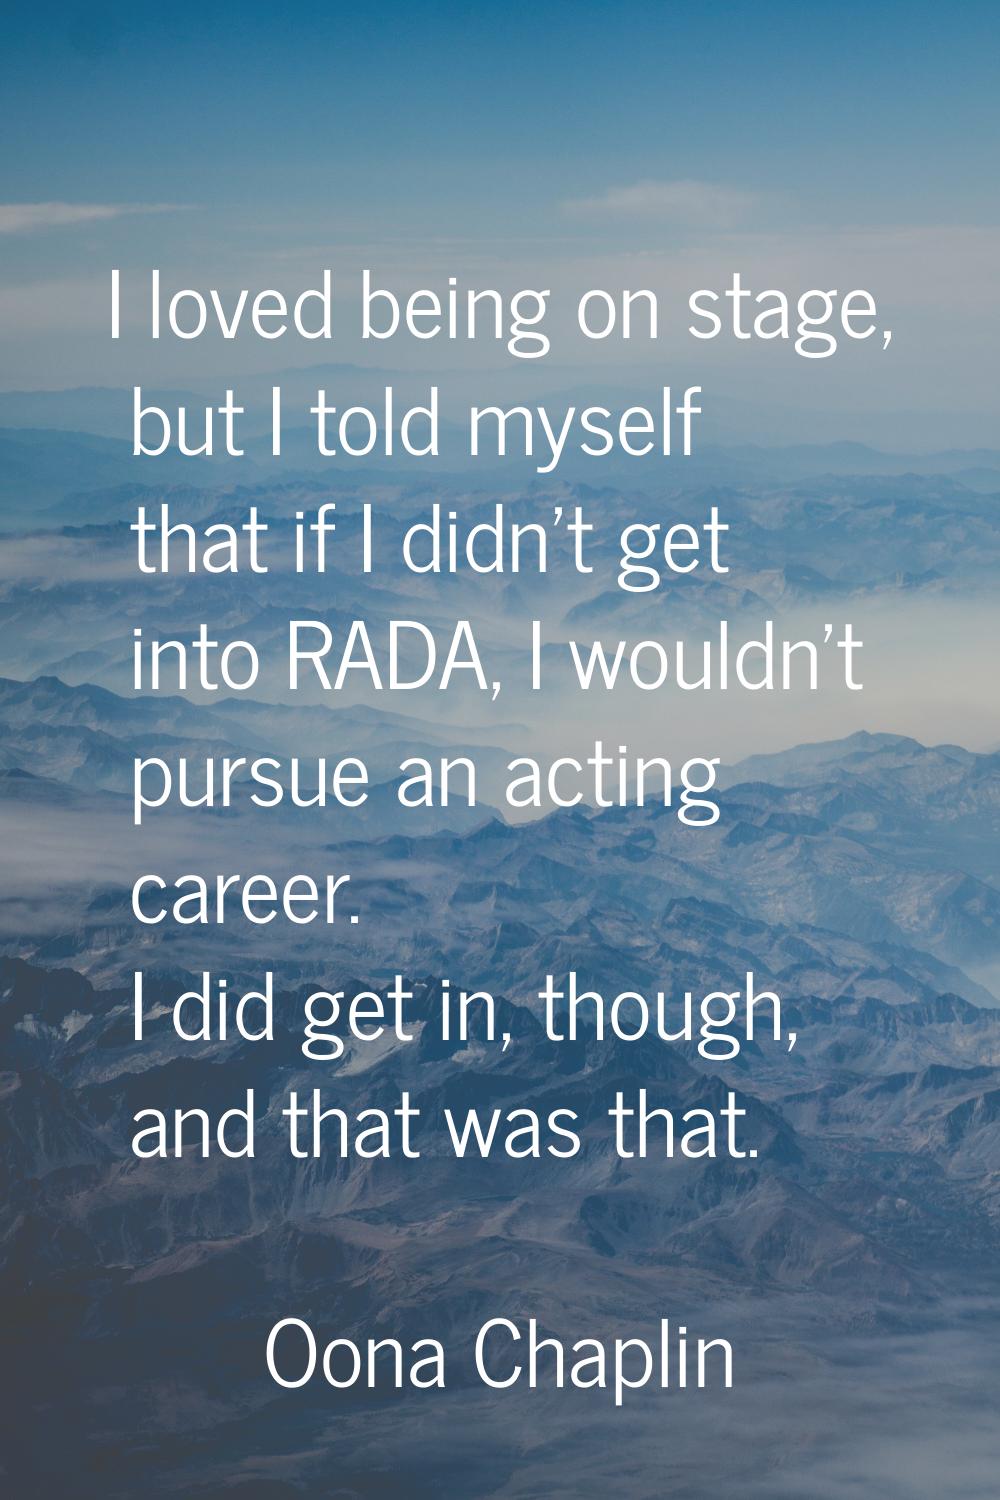 I loved being on stage, but I told myself that if I didn't get into RADA, I wouldn't pursue an acti